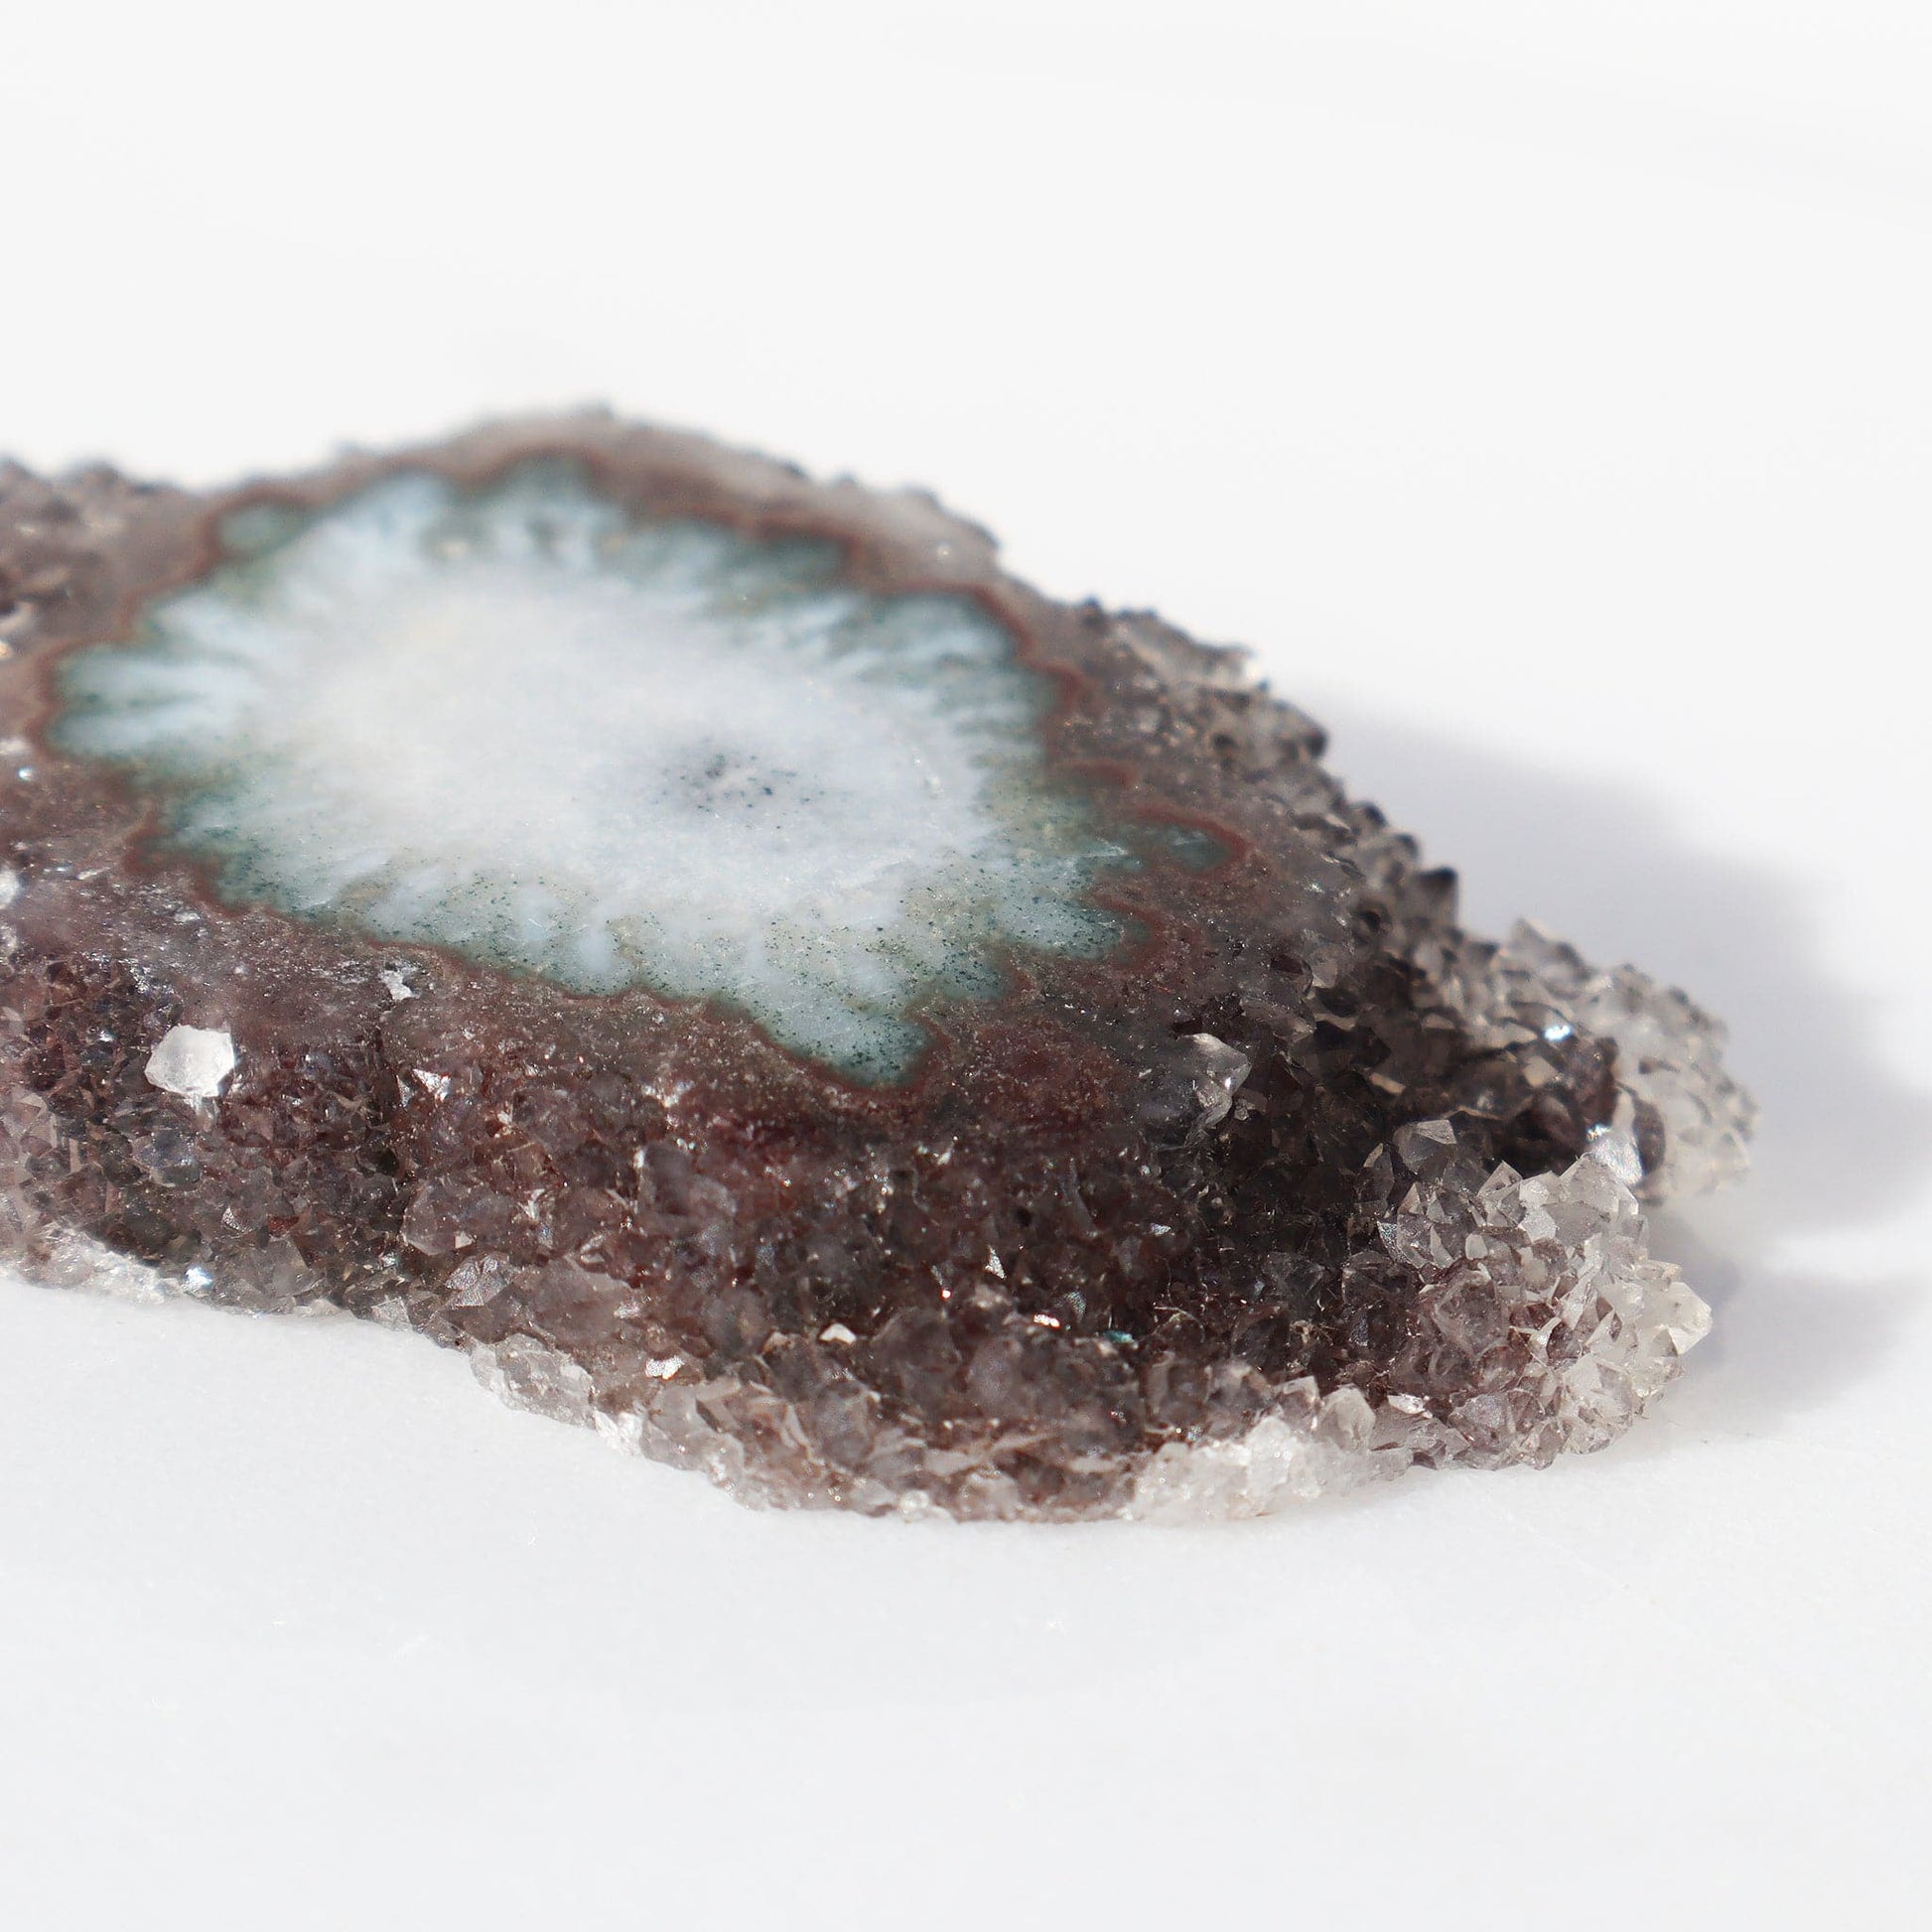 SEACRAB rare amethyst stalactite fragment from Uruguay, for sale - Deepest Earth